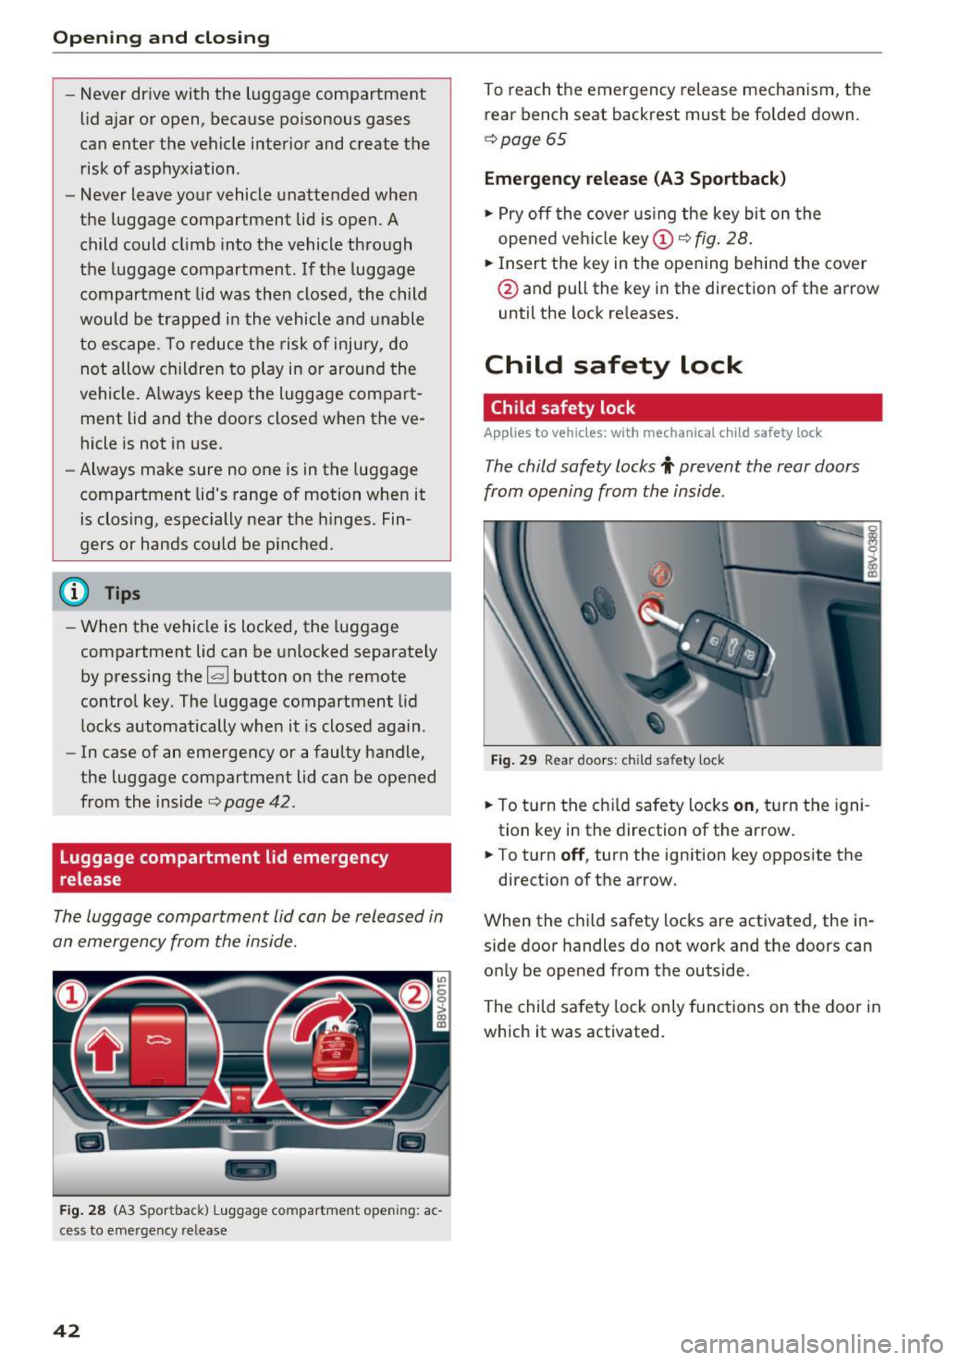 AUDI S3 2016  Owners Manual Opening  and clo sin g 
- Never  drive  with  the  luggage  compartment 
lid ajar  or open,  because  poisonous  gases 
can  enter  the  vehicle  interior  and  create  the 
risk of  asphyxiation . 
-